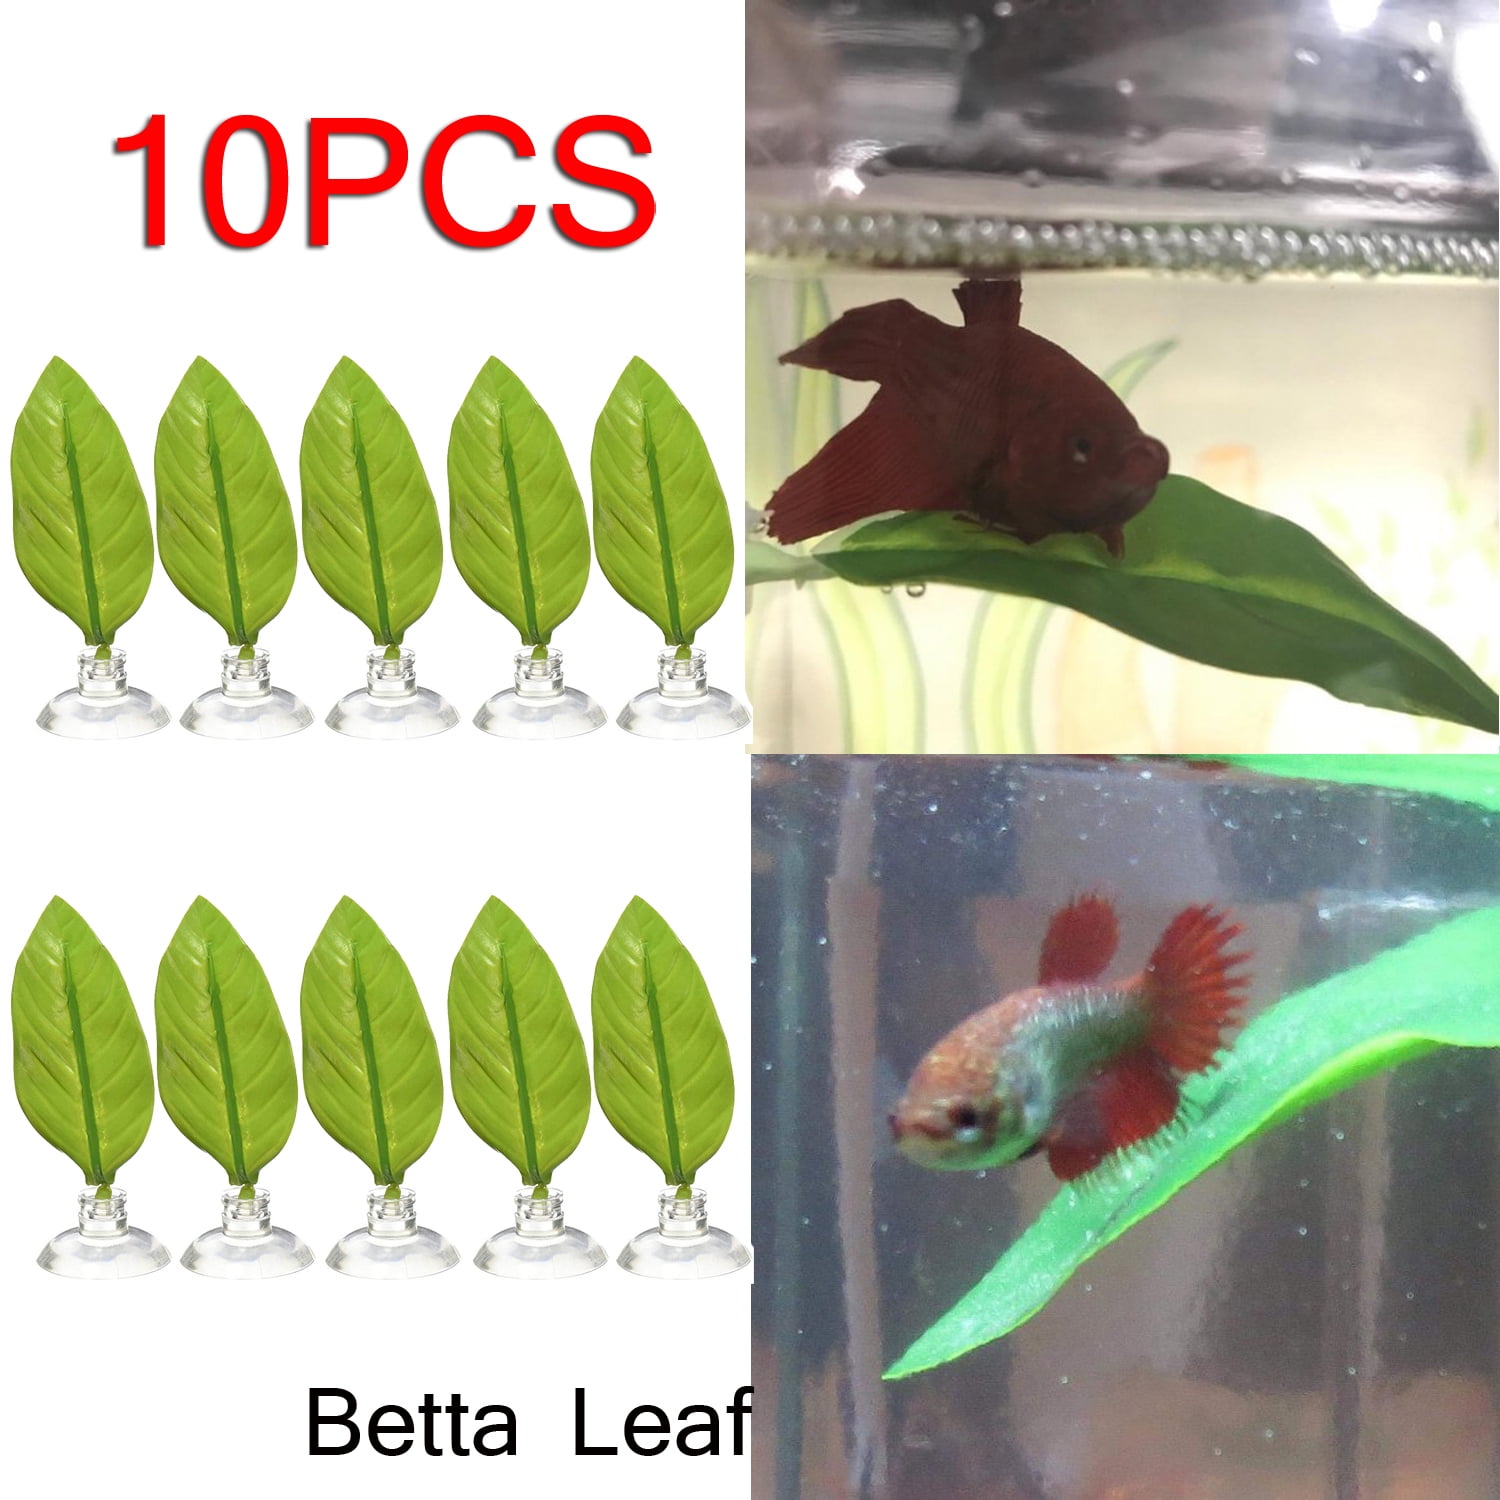 8pcs Fish Rest Bed Hammock Waterproof Single-Layered Betta Suction Cup Non-Toxic Artificial Spawning Leaf, Size: 8 Pack, Green